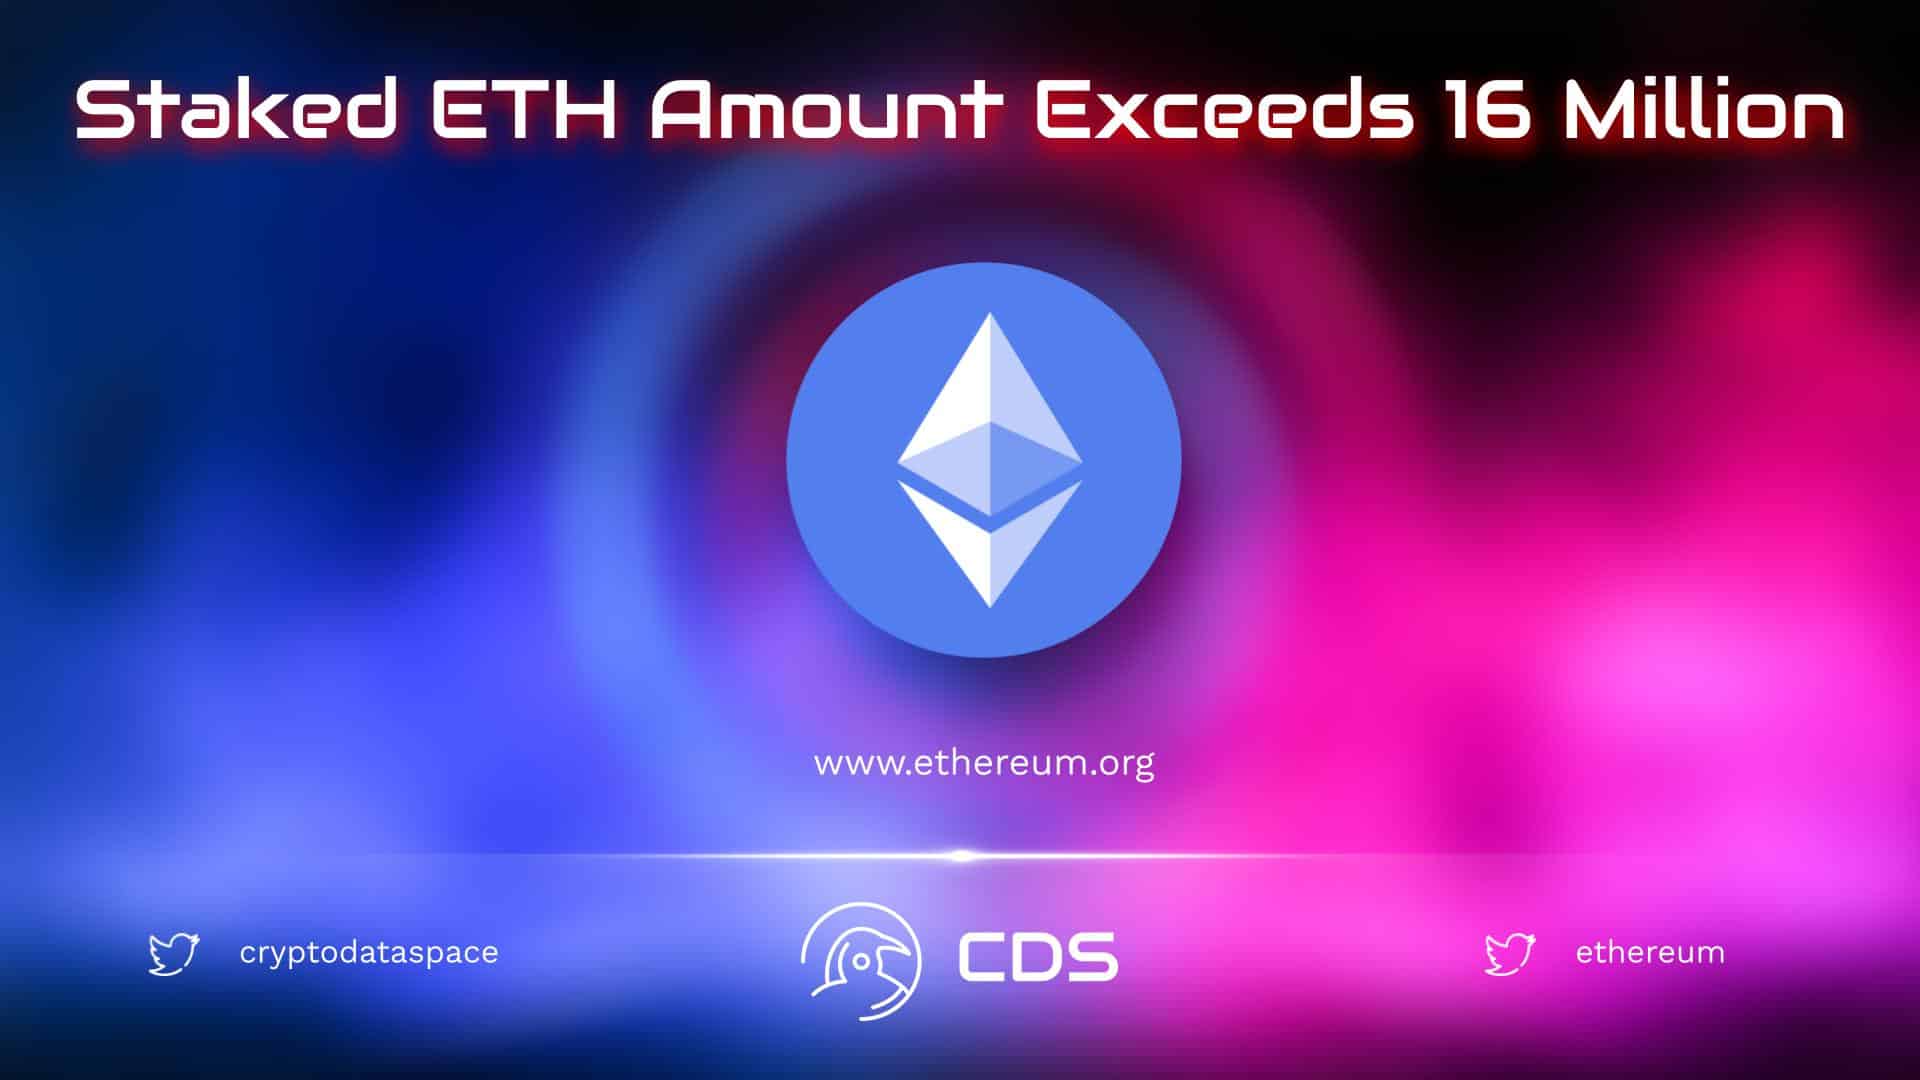 Staked ETH Amount Exceeds 16 Million